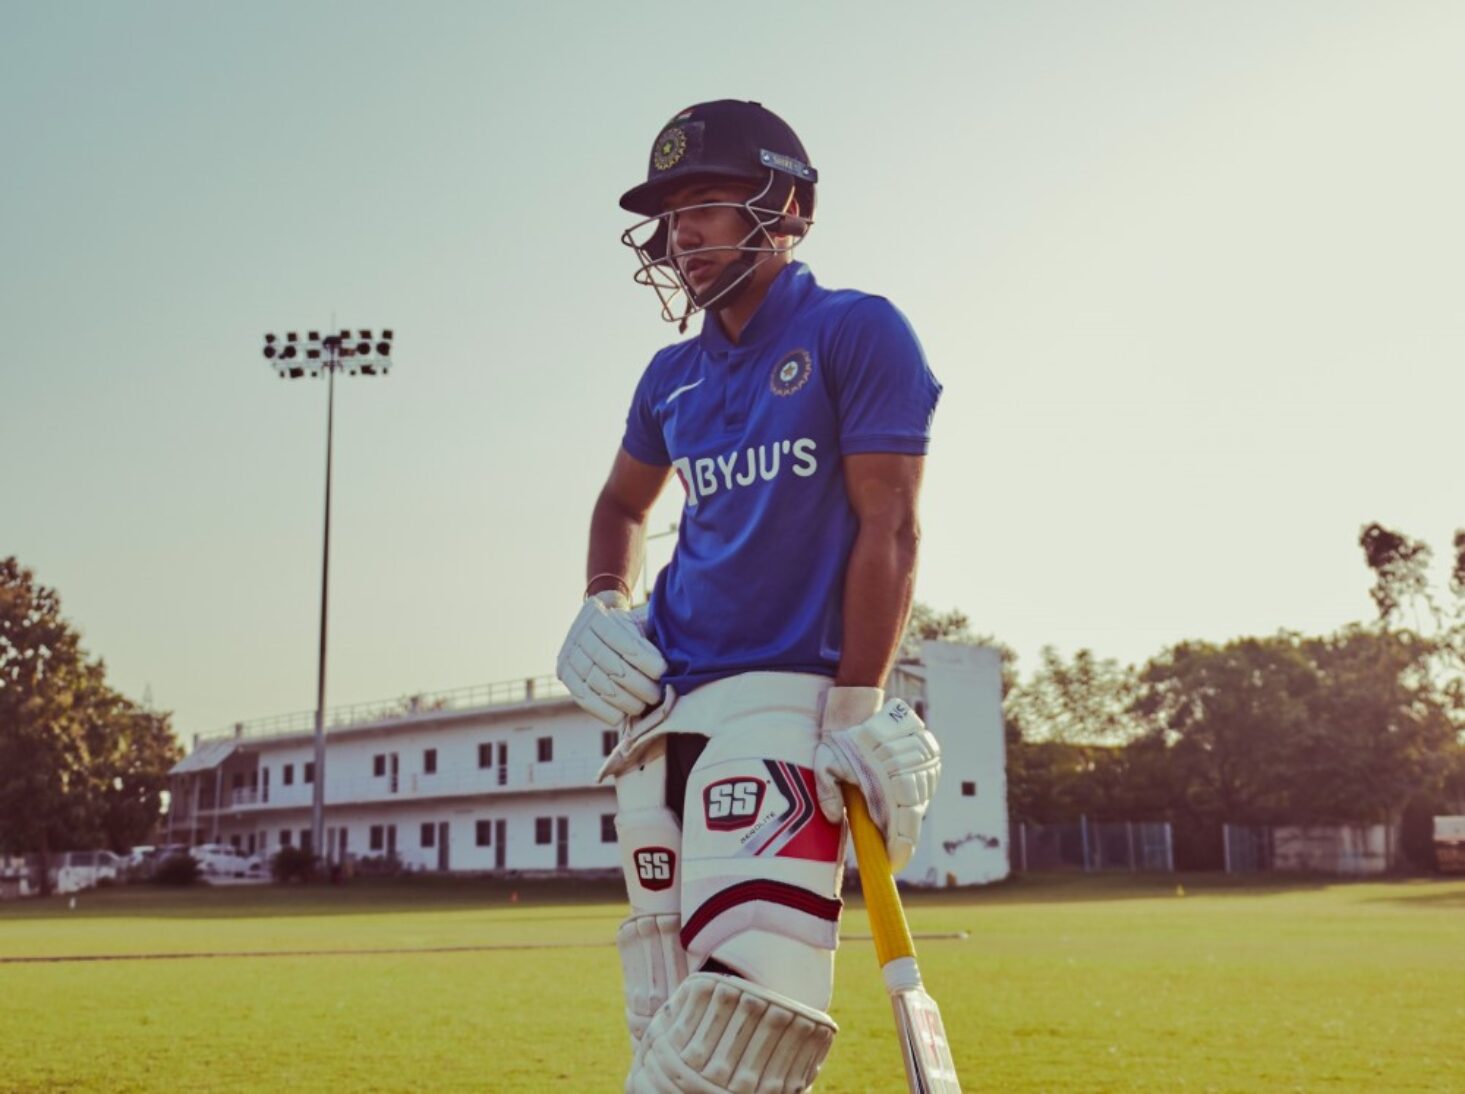 Comparing the Top Brands for Cricket Gear